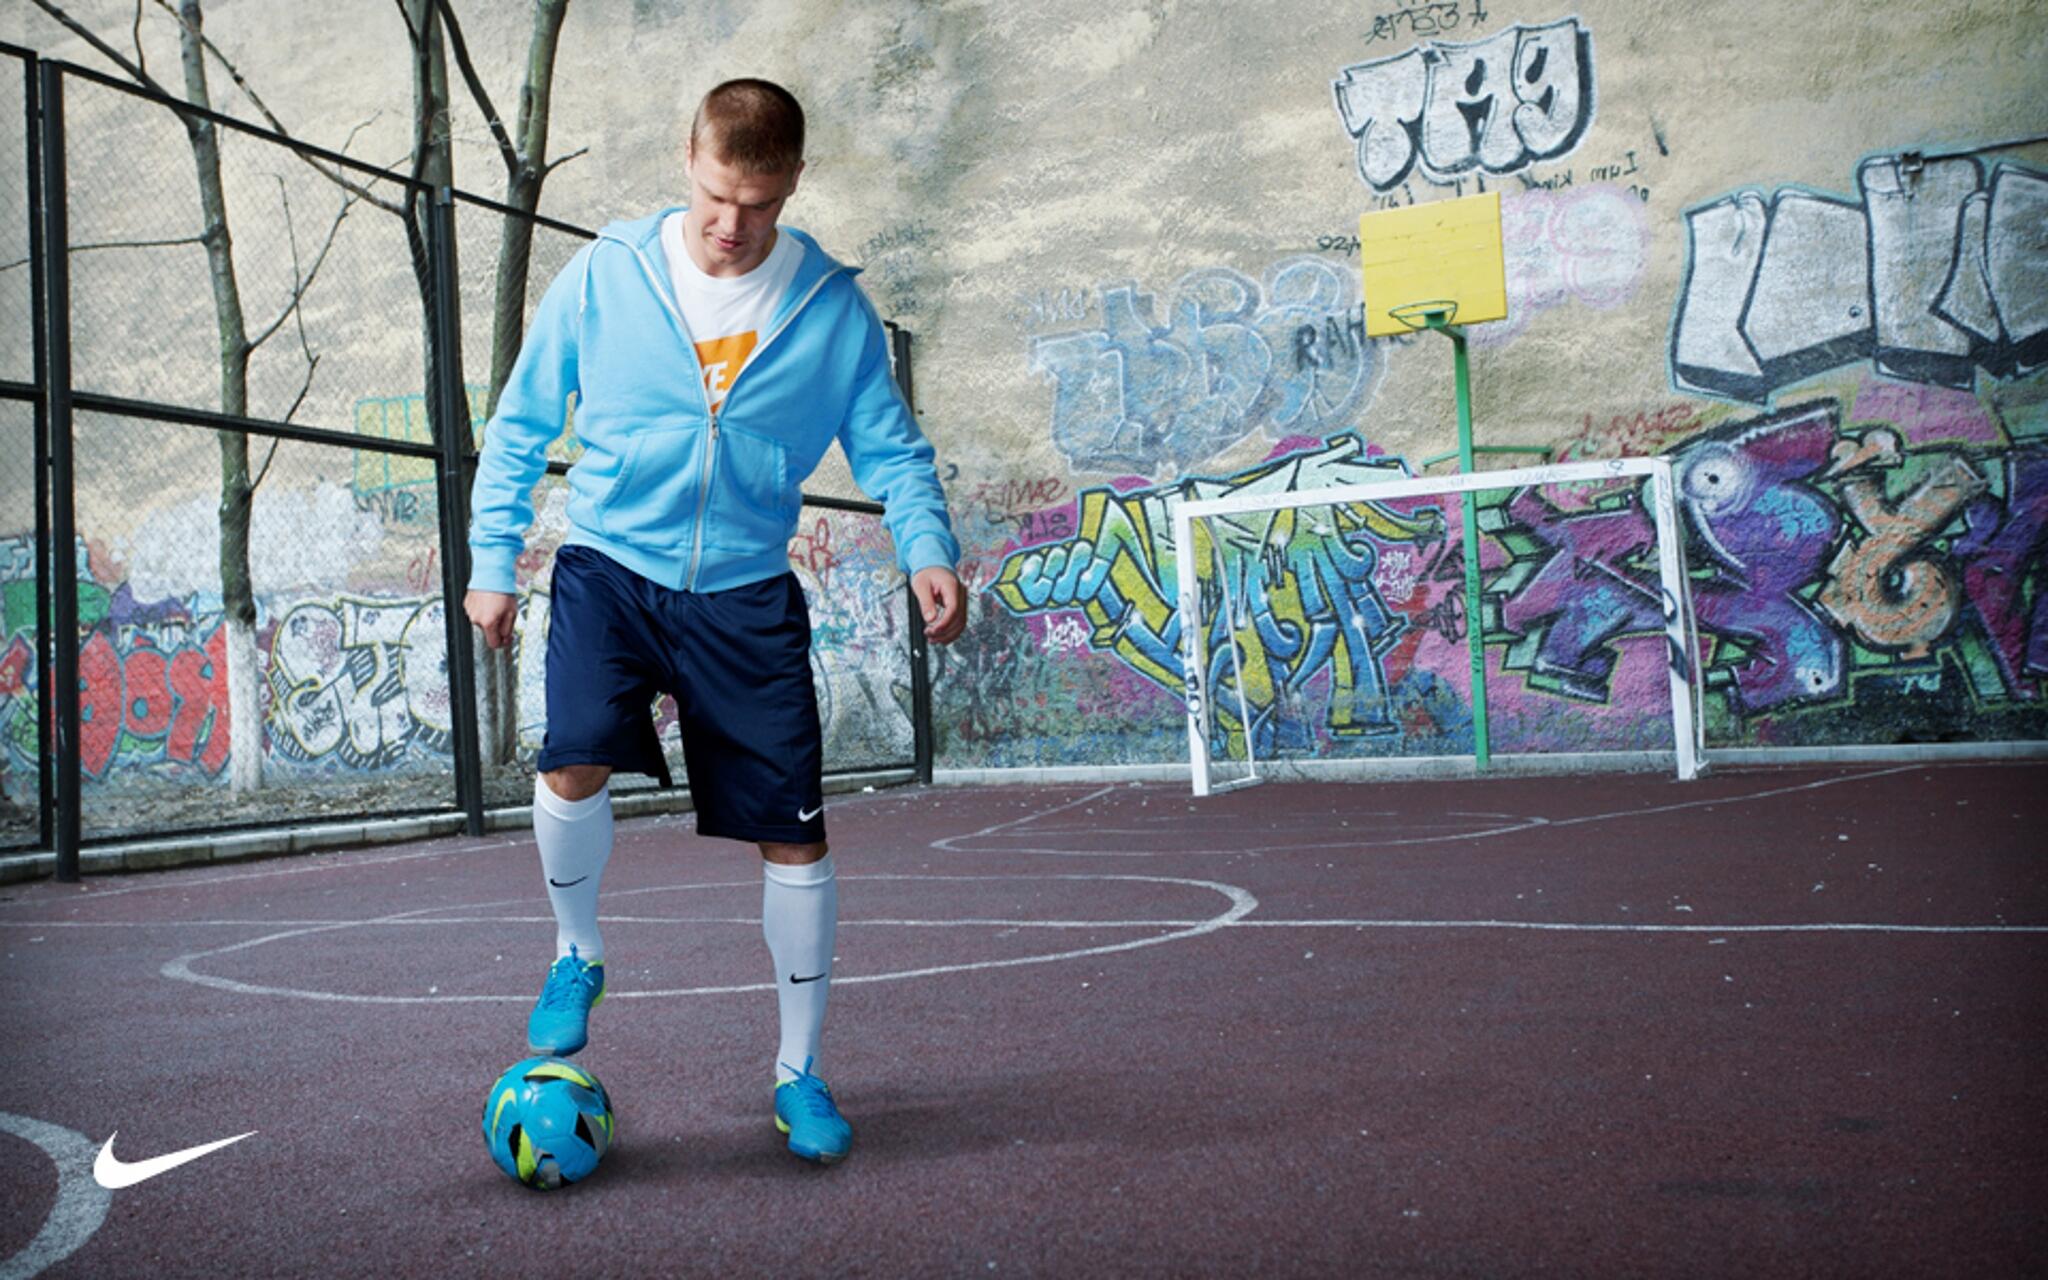 orientación Se convierte en maximizar Nike Football on Twitter: "On the streets of St. Petersburg. This is Igor  Denisov's ground. Show us where you play your game. #MyGround  http://t.co/V0SuXpOgRt" / Twitter